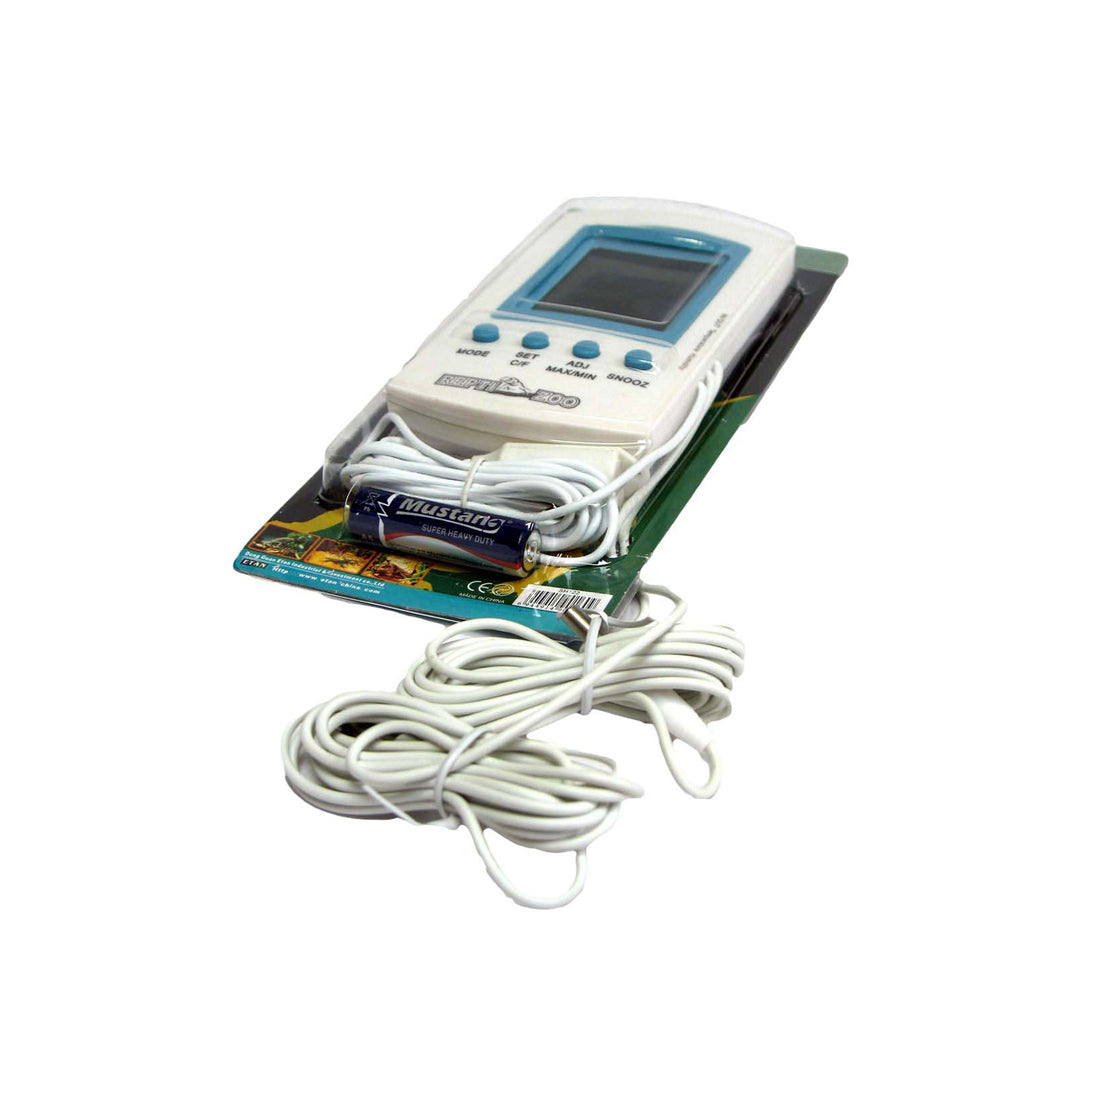 LCD Digital Thermometer + Humidity with 3 remote probes